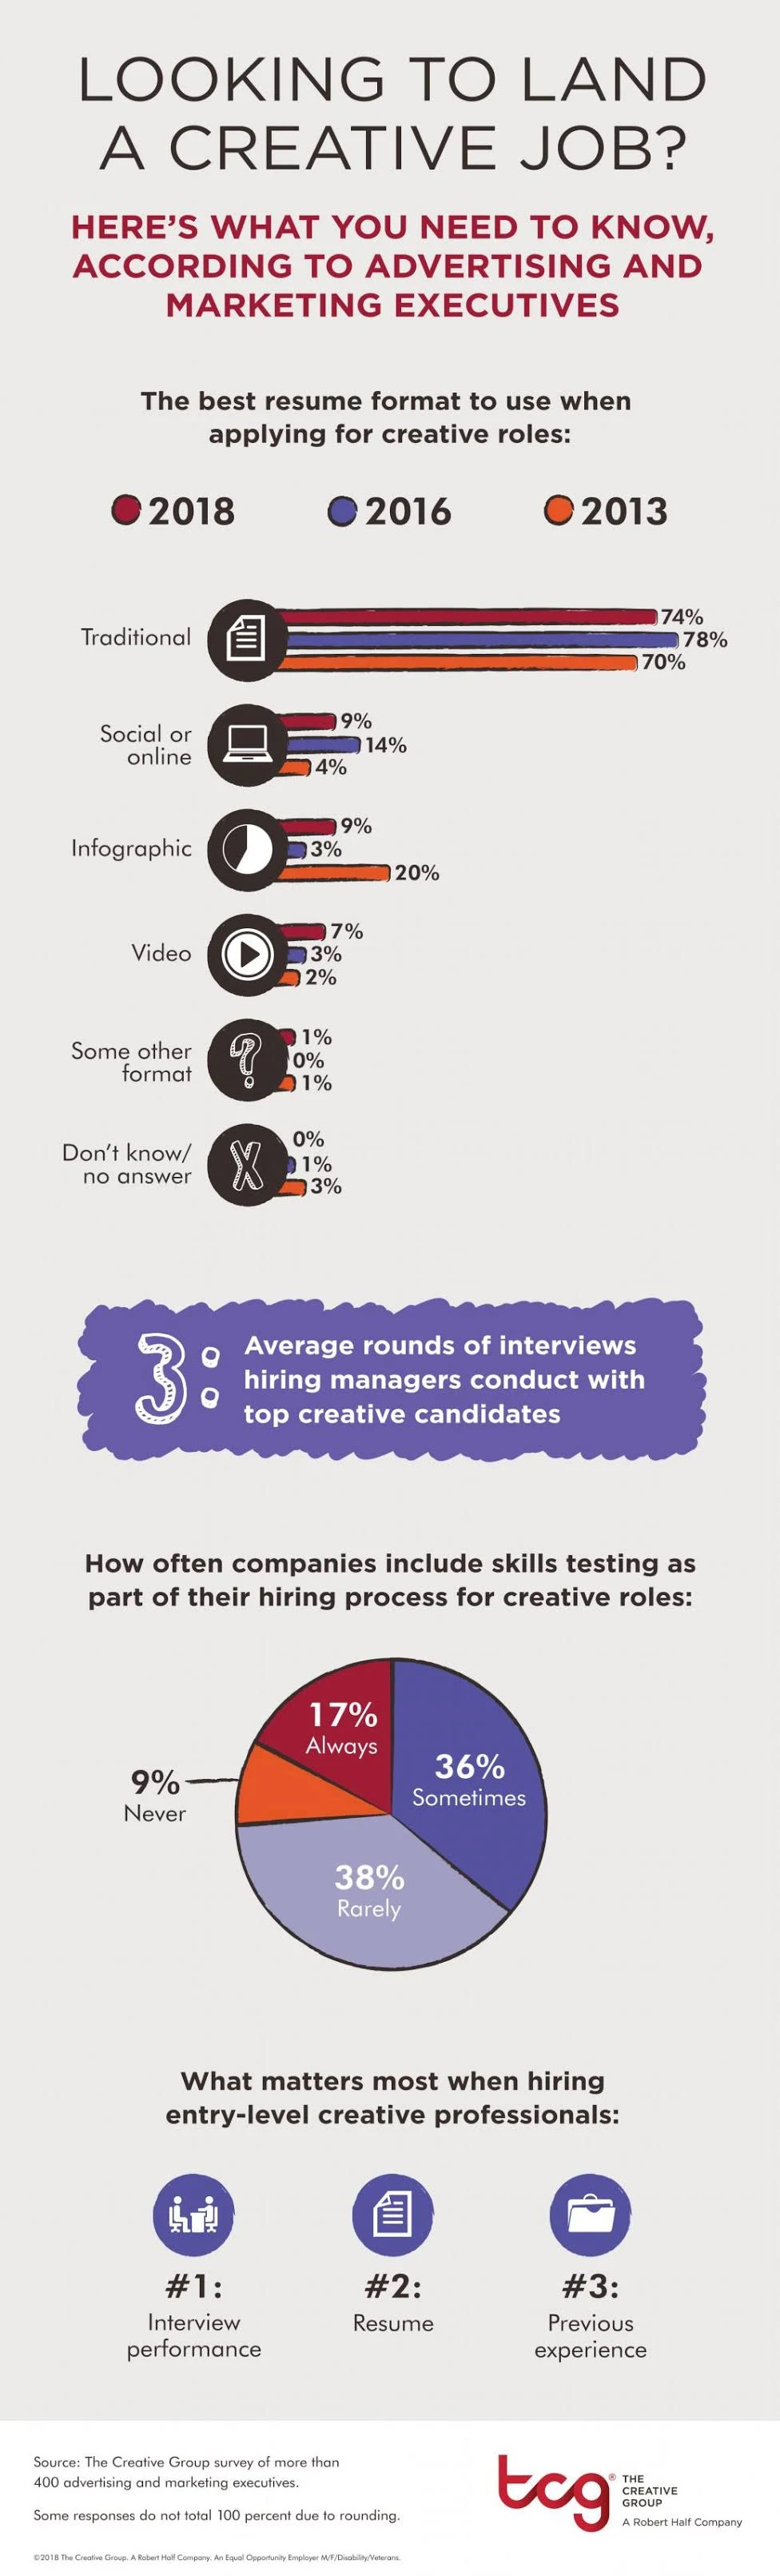 Landing a Marketing Job: What Matters to Hiring Managers [Infographic]